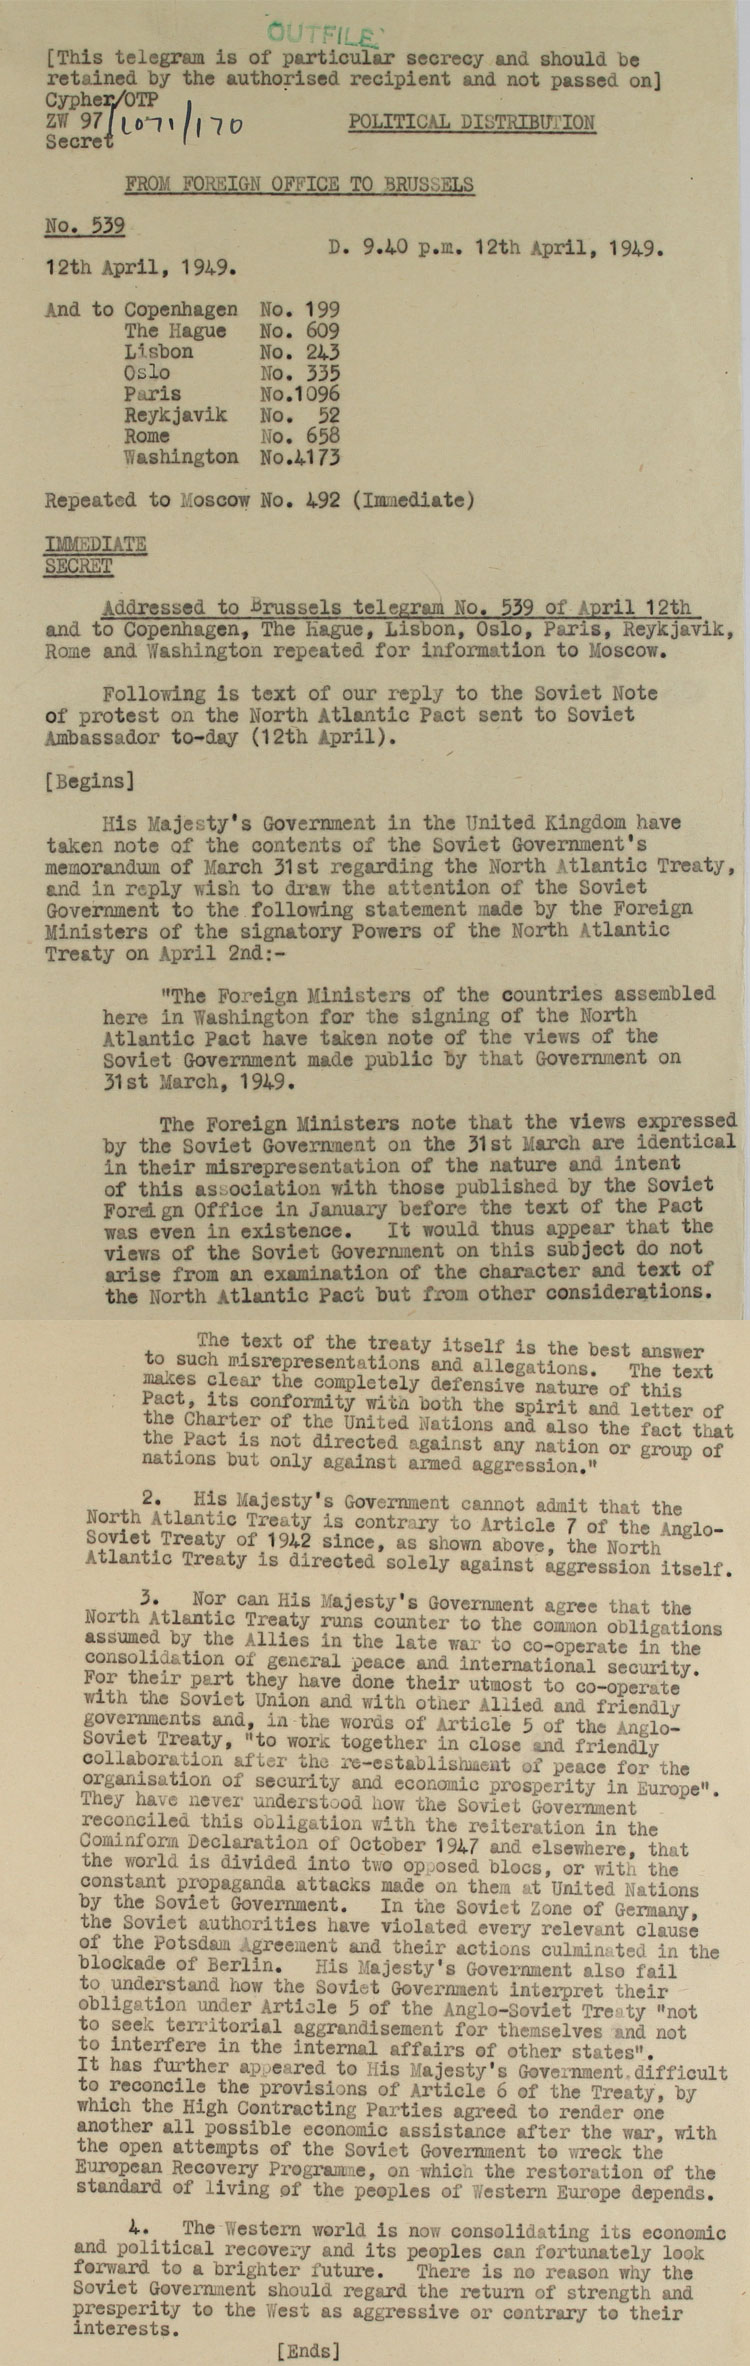 Telegram sent from the Foreign Office to Brussels recording their reply to the Soviet Government on the North Atlantic Treaty, 12th April, 1949. (FO 371/79919)